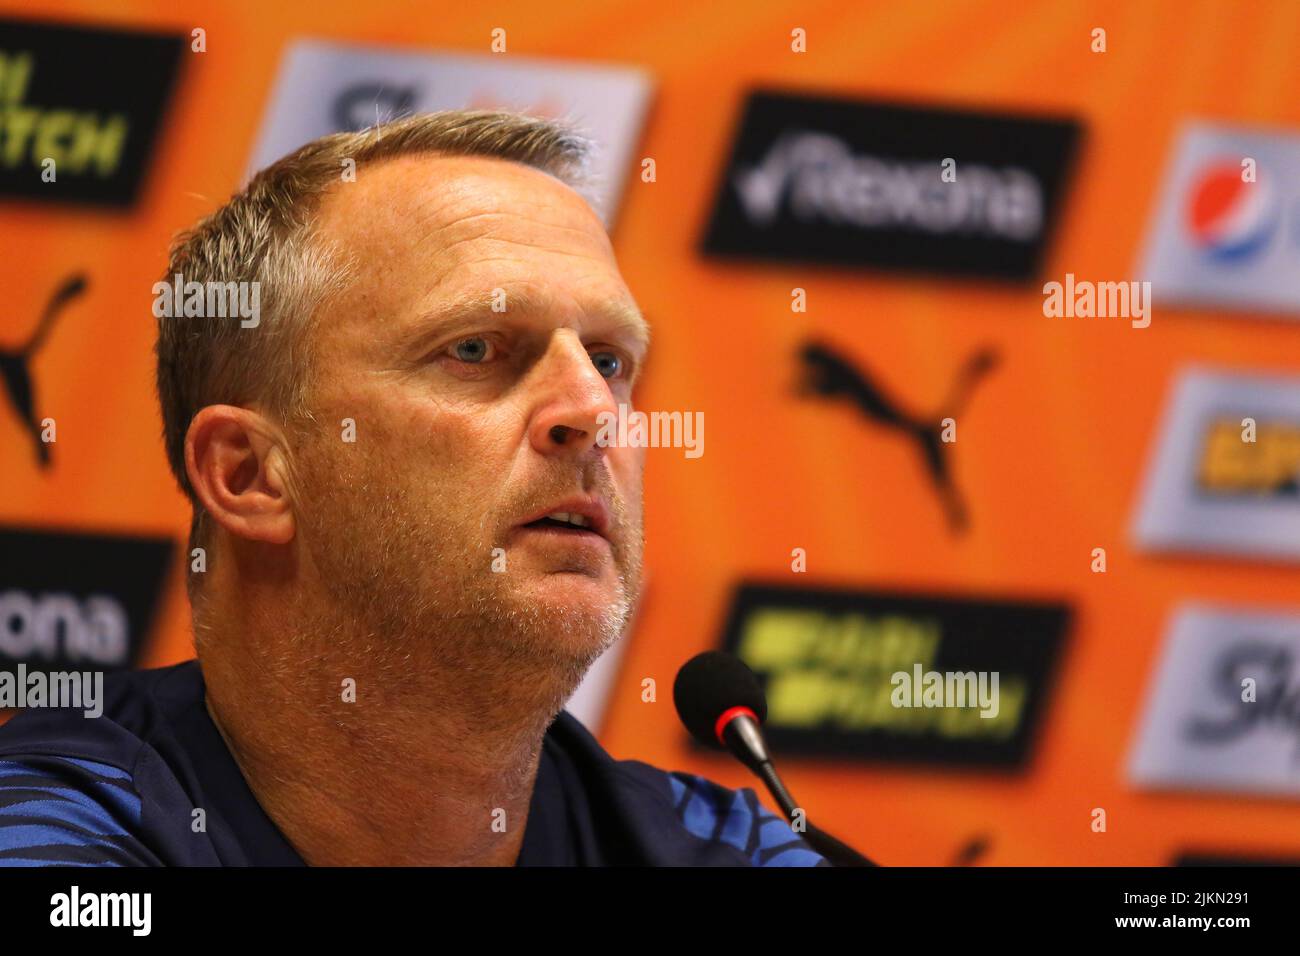 KYIV, UKRAINE - AUGUST 10, 2021: Genk manager John van den Brom attends the press-conference before the UEFA Champions League third qualifying round game against Shakhtar Donetsk in Kyiv Stock Photo